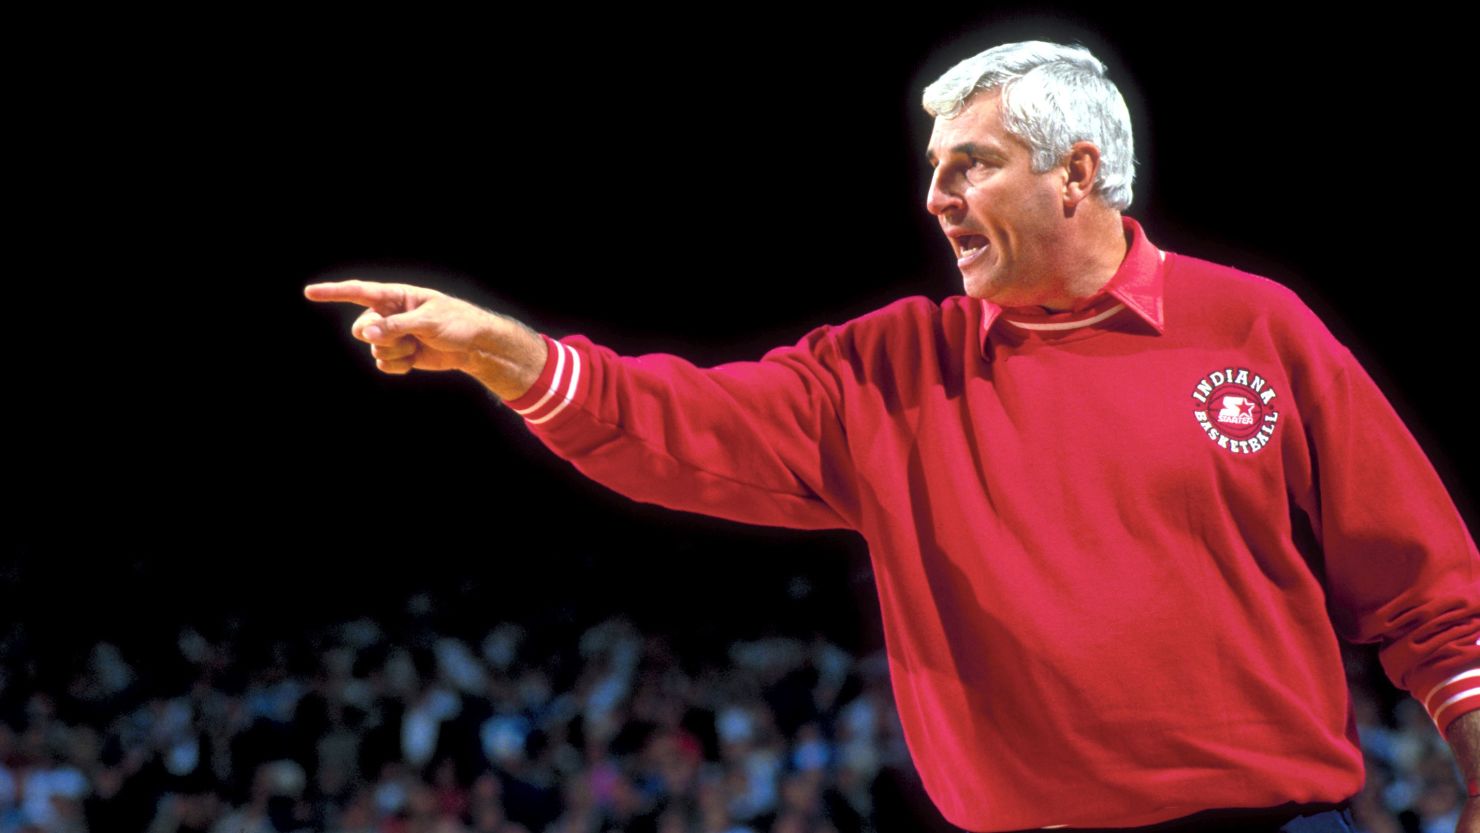 Bob Knight, seen here coaching Indiana in December 1994, won 902 NCAA Division I men’s games as a coach before retiring in 2008 -- a record at the time.